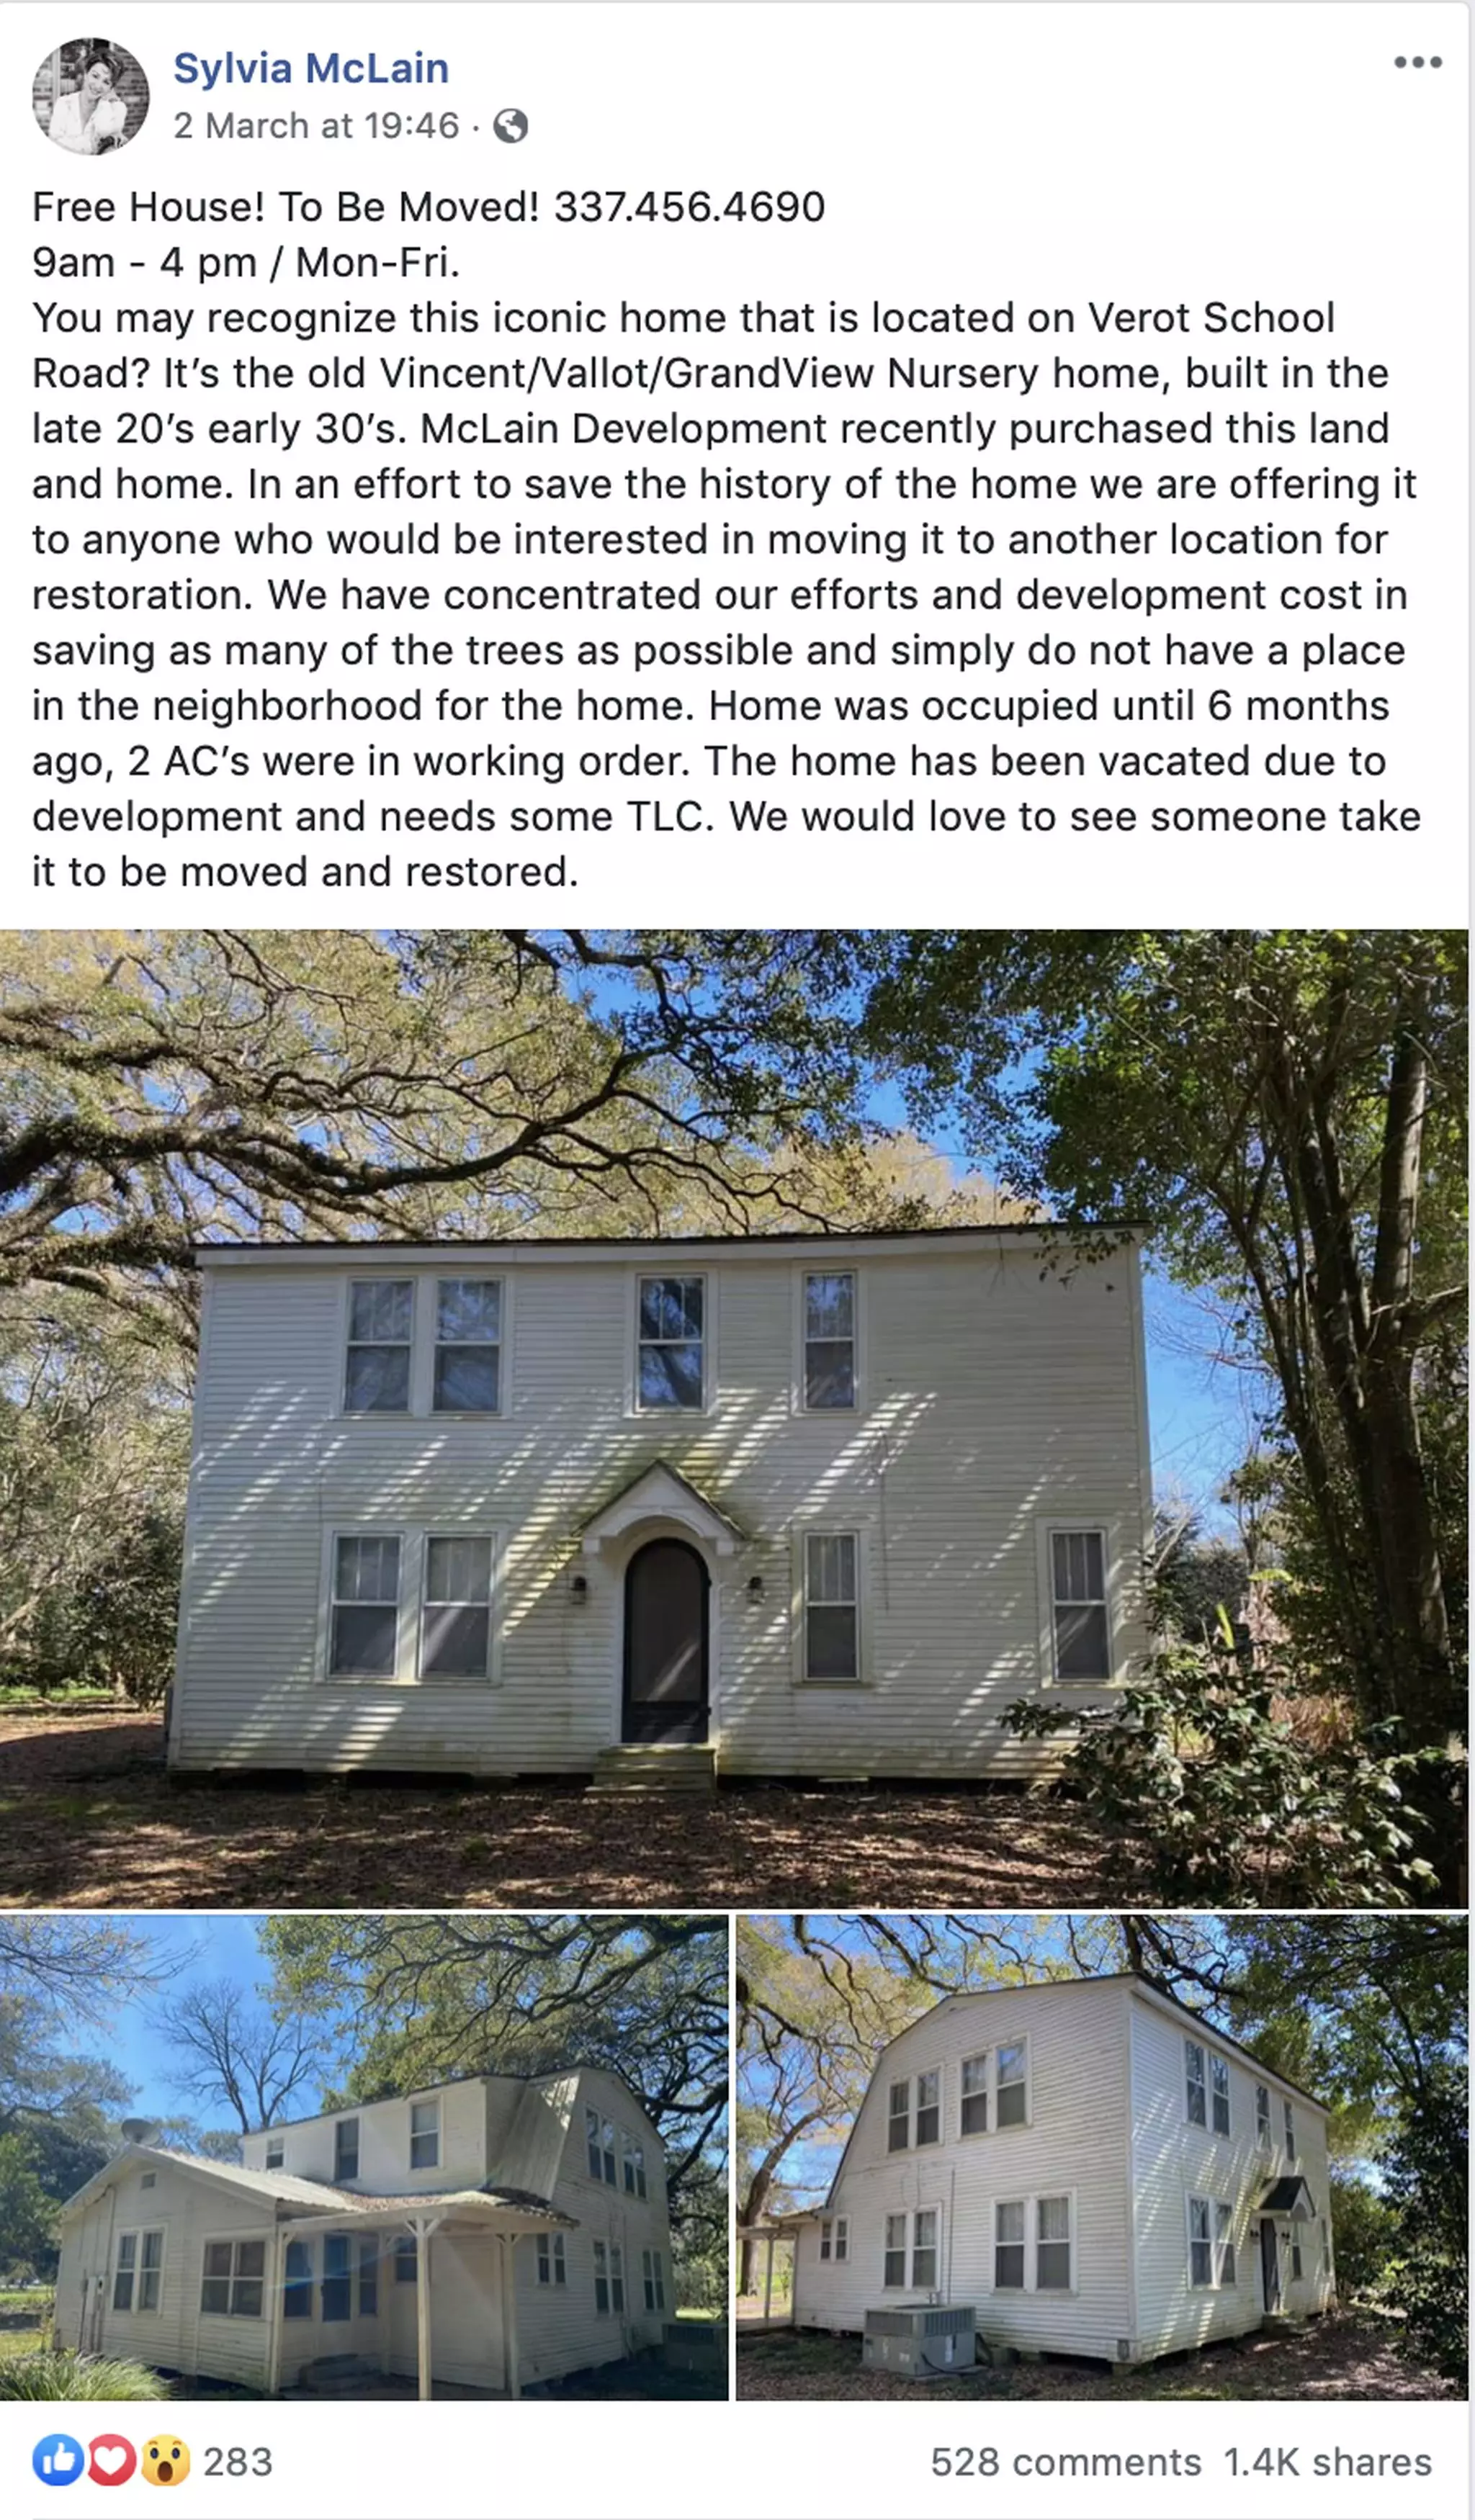 The Facebook post trying to sell the house.